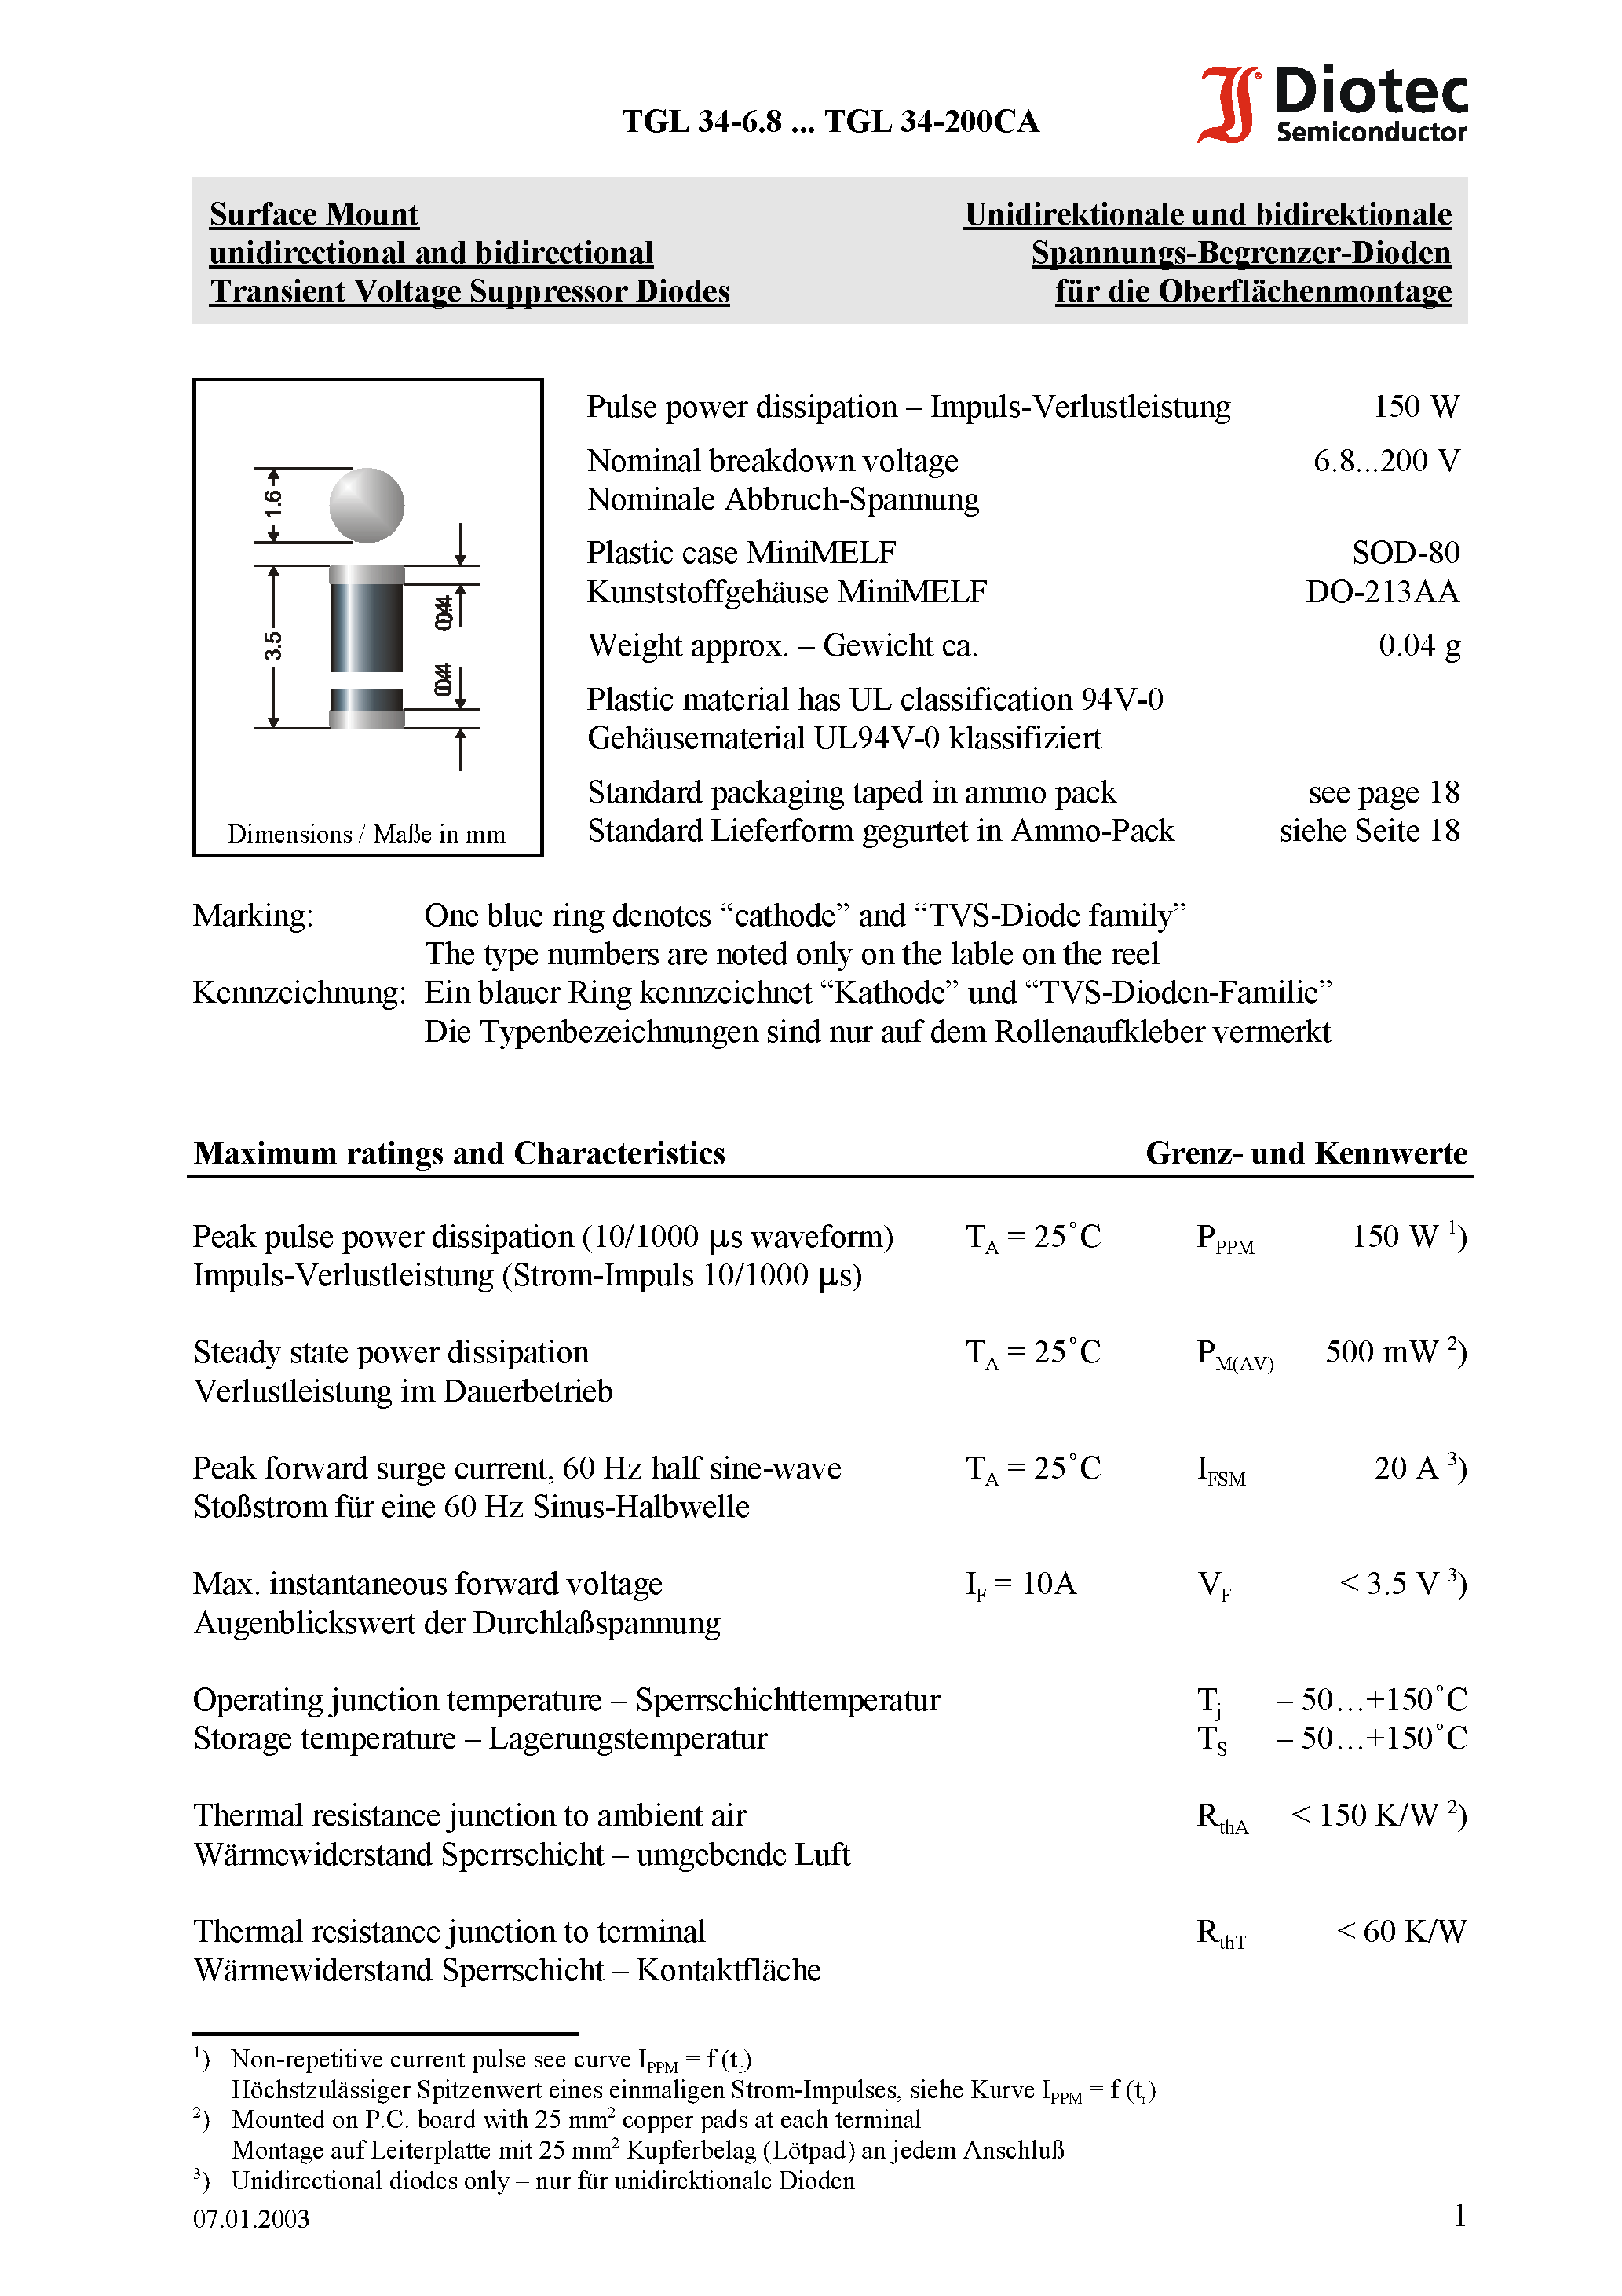 Datasheet TGL34-9.1 - Surface Mount unidirectional and bidirectional Transient Voltage Suppressor Diodes page 1